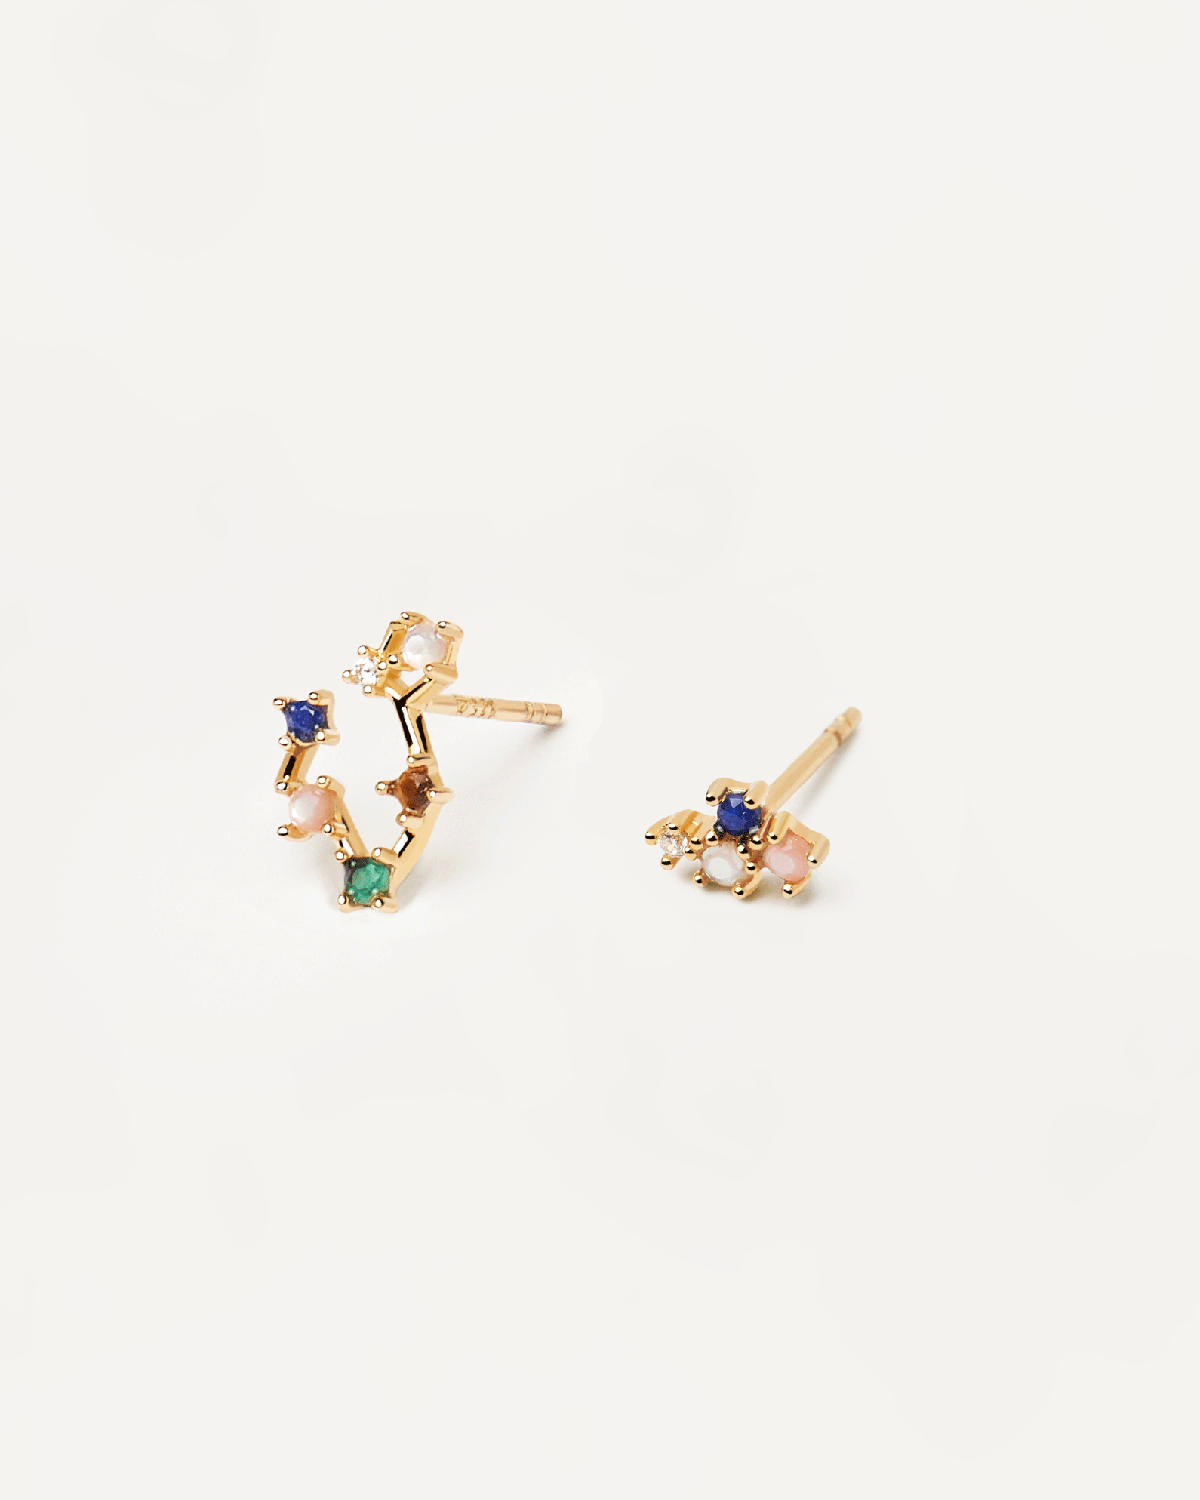 2021 Selection | Pisces Earrings. Get the latest arrival from PDPAOLA. Place your order safely and get this Best Seller. Free Shipping over 70€